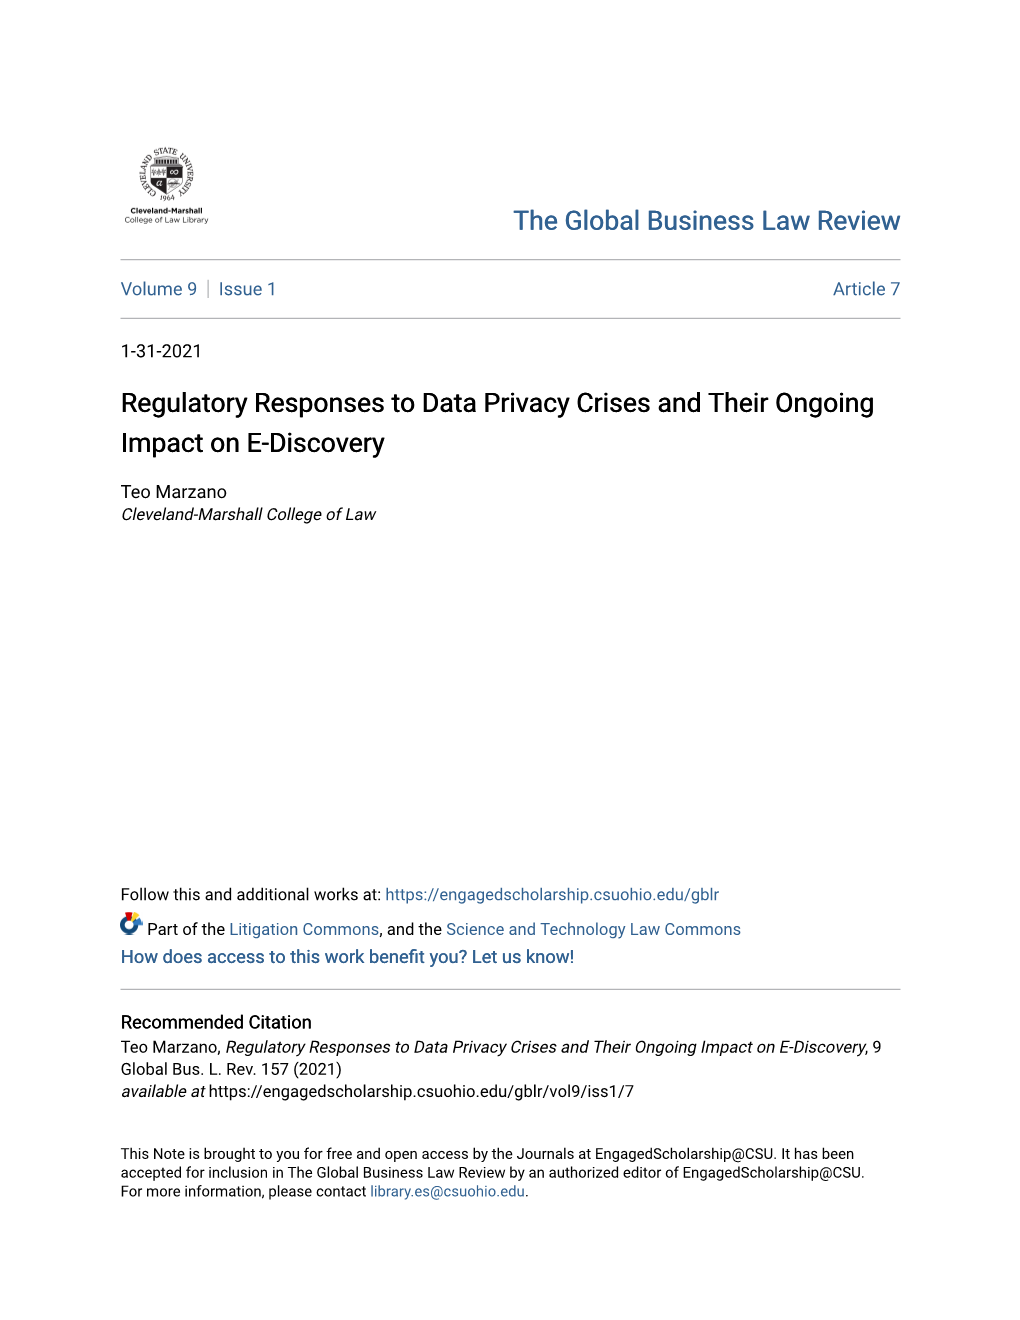 Regulatory Responses to Data Privacy Crises and Their Ongoing Impact on E-Discovery